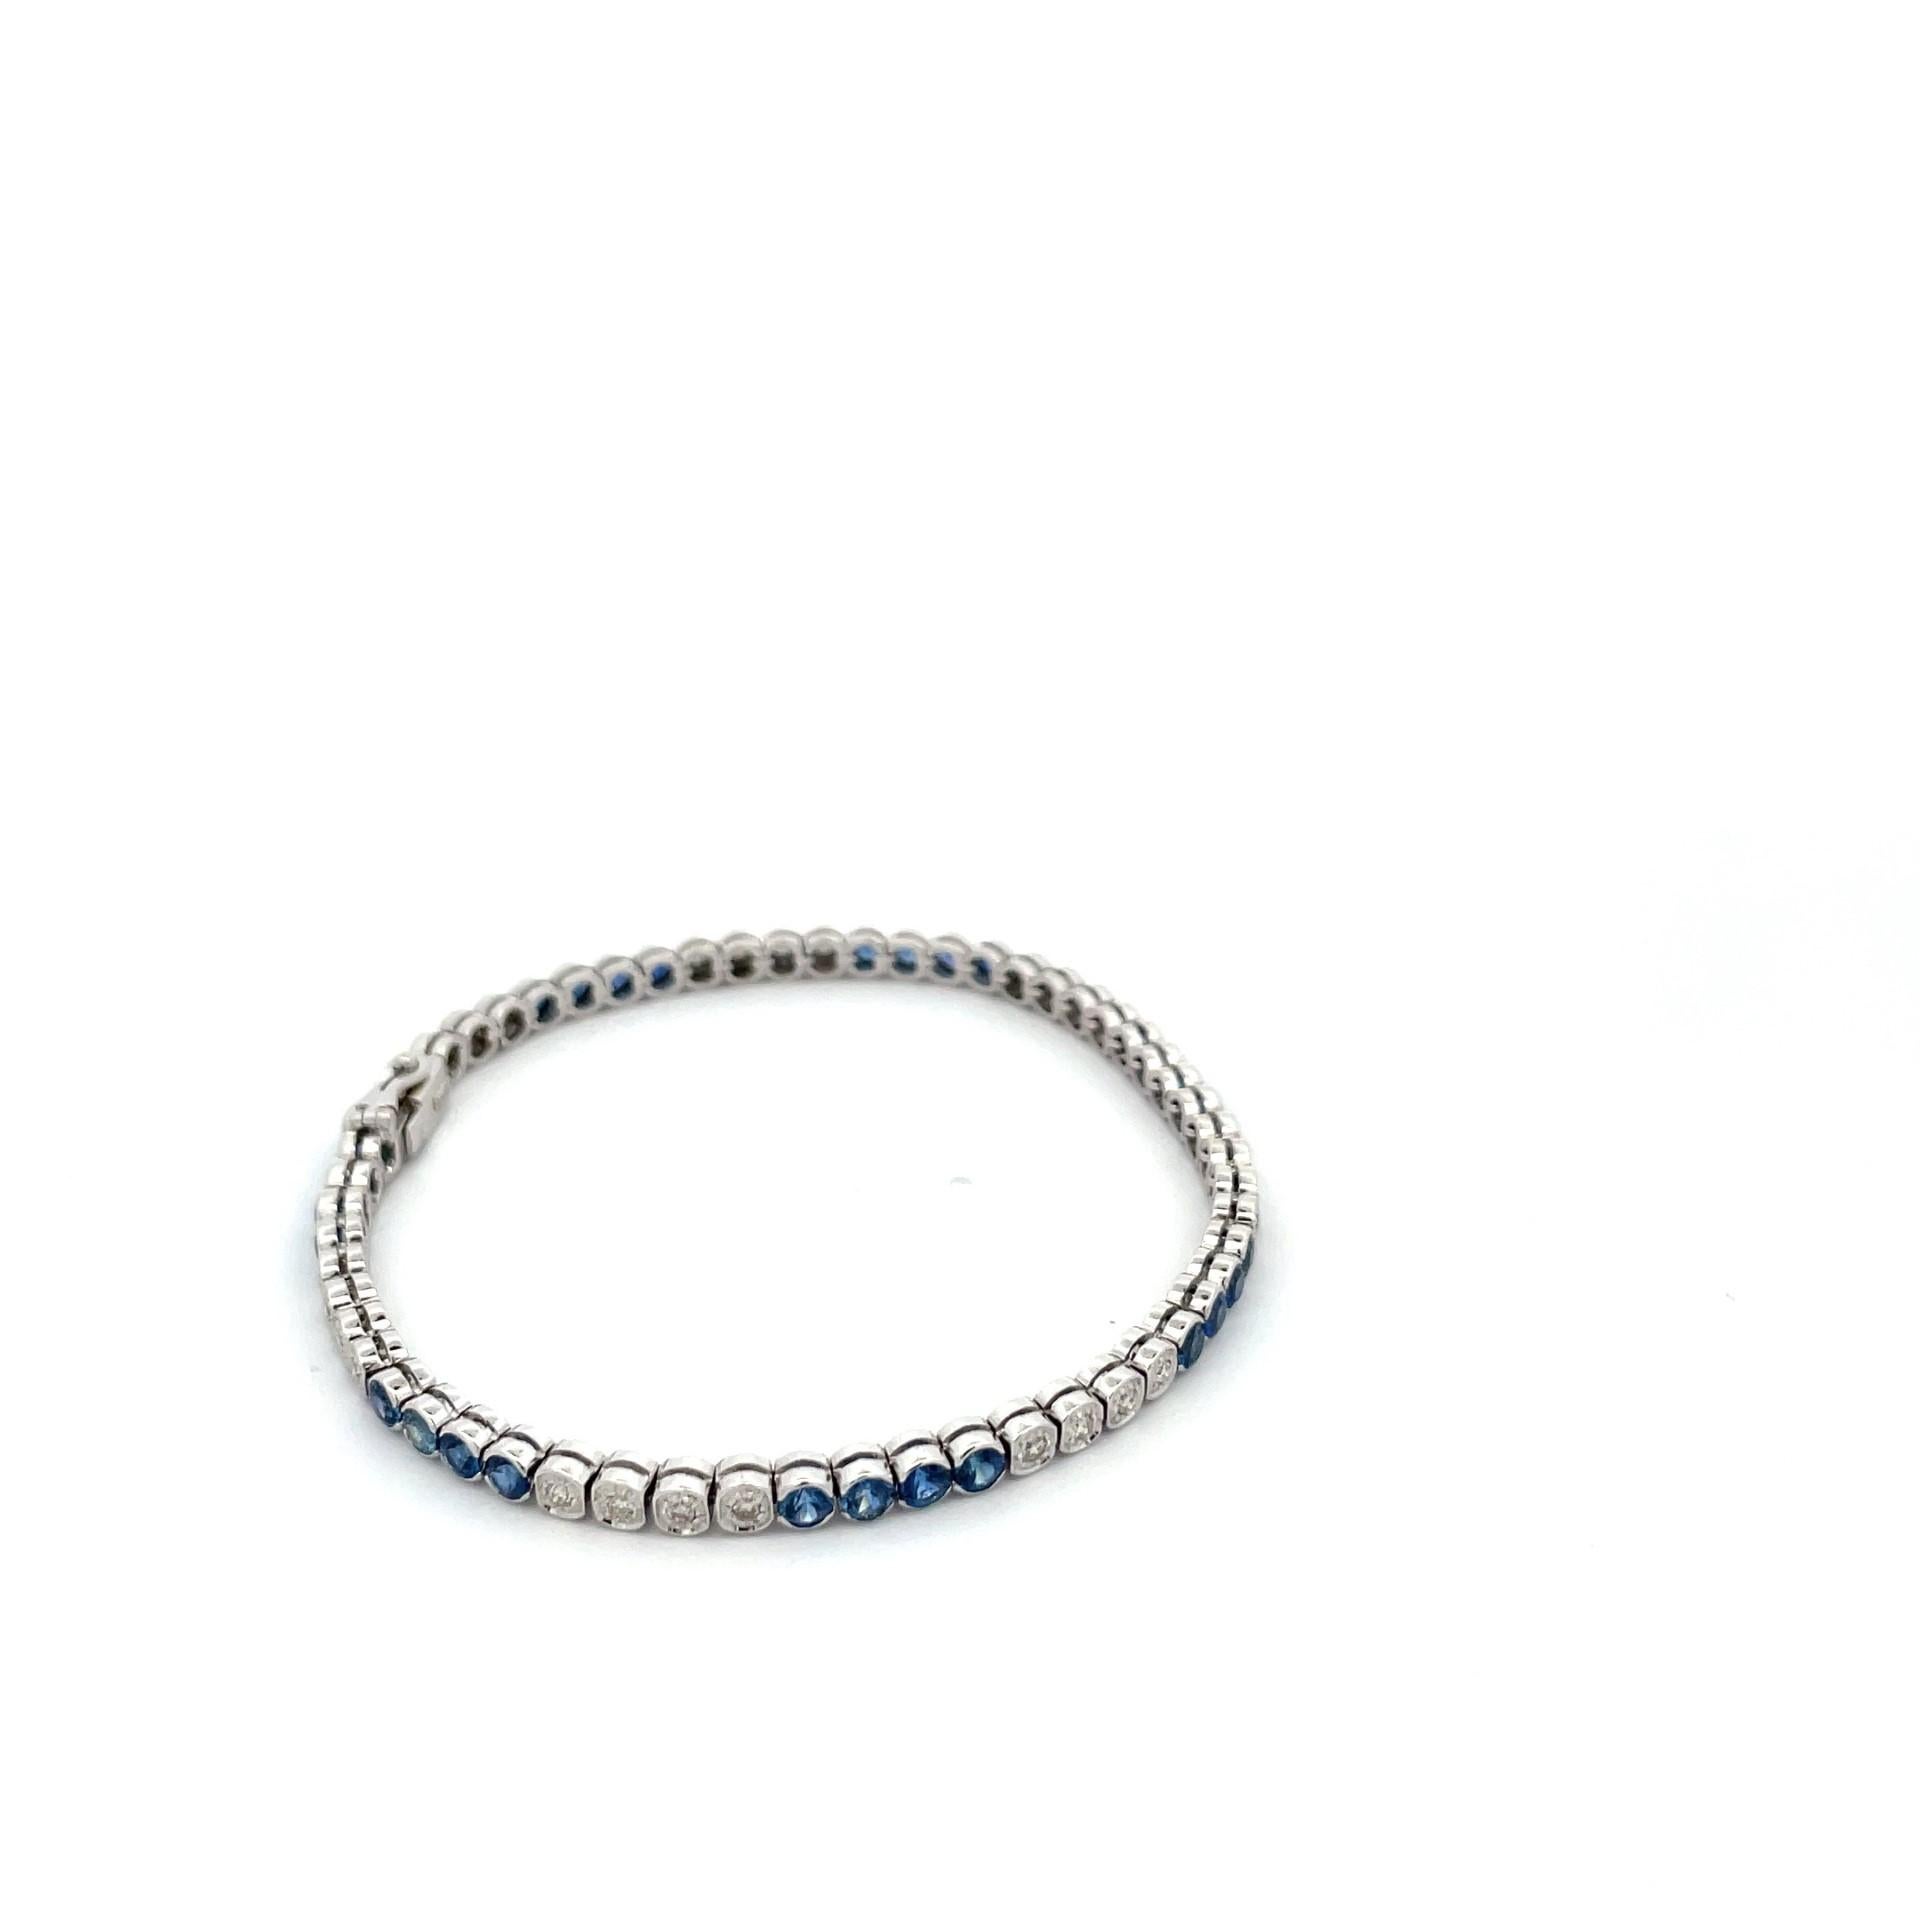 An impressive bezel and tube 18 Kt white gold bracelet with natural blue sapphires and natural white diamond. It